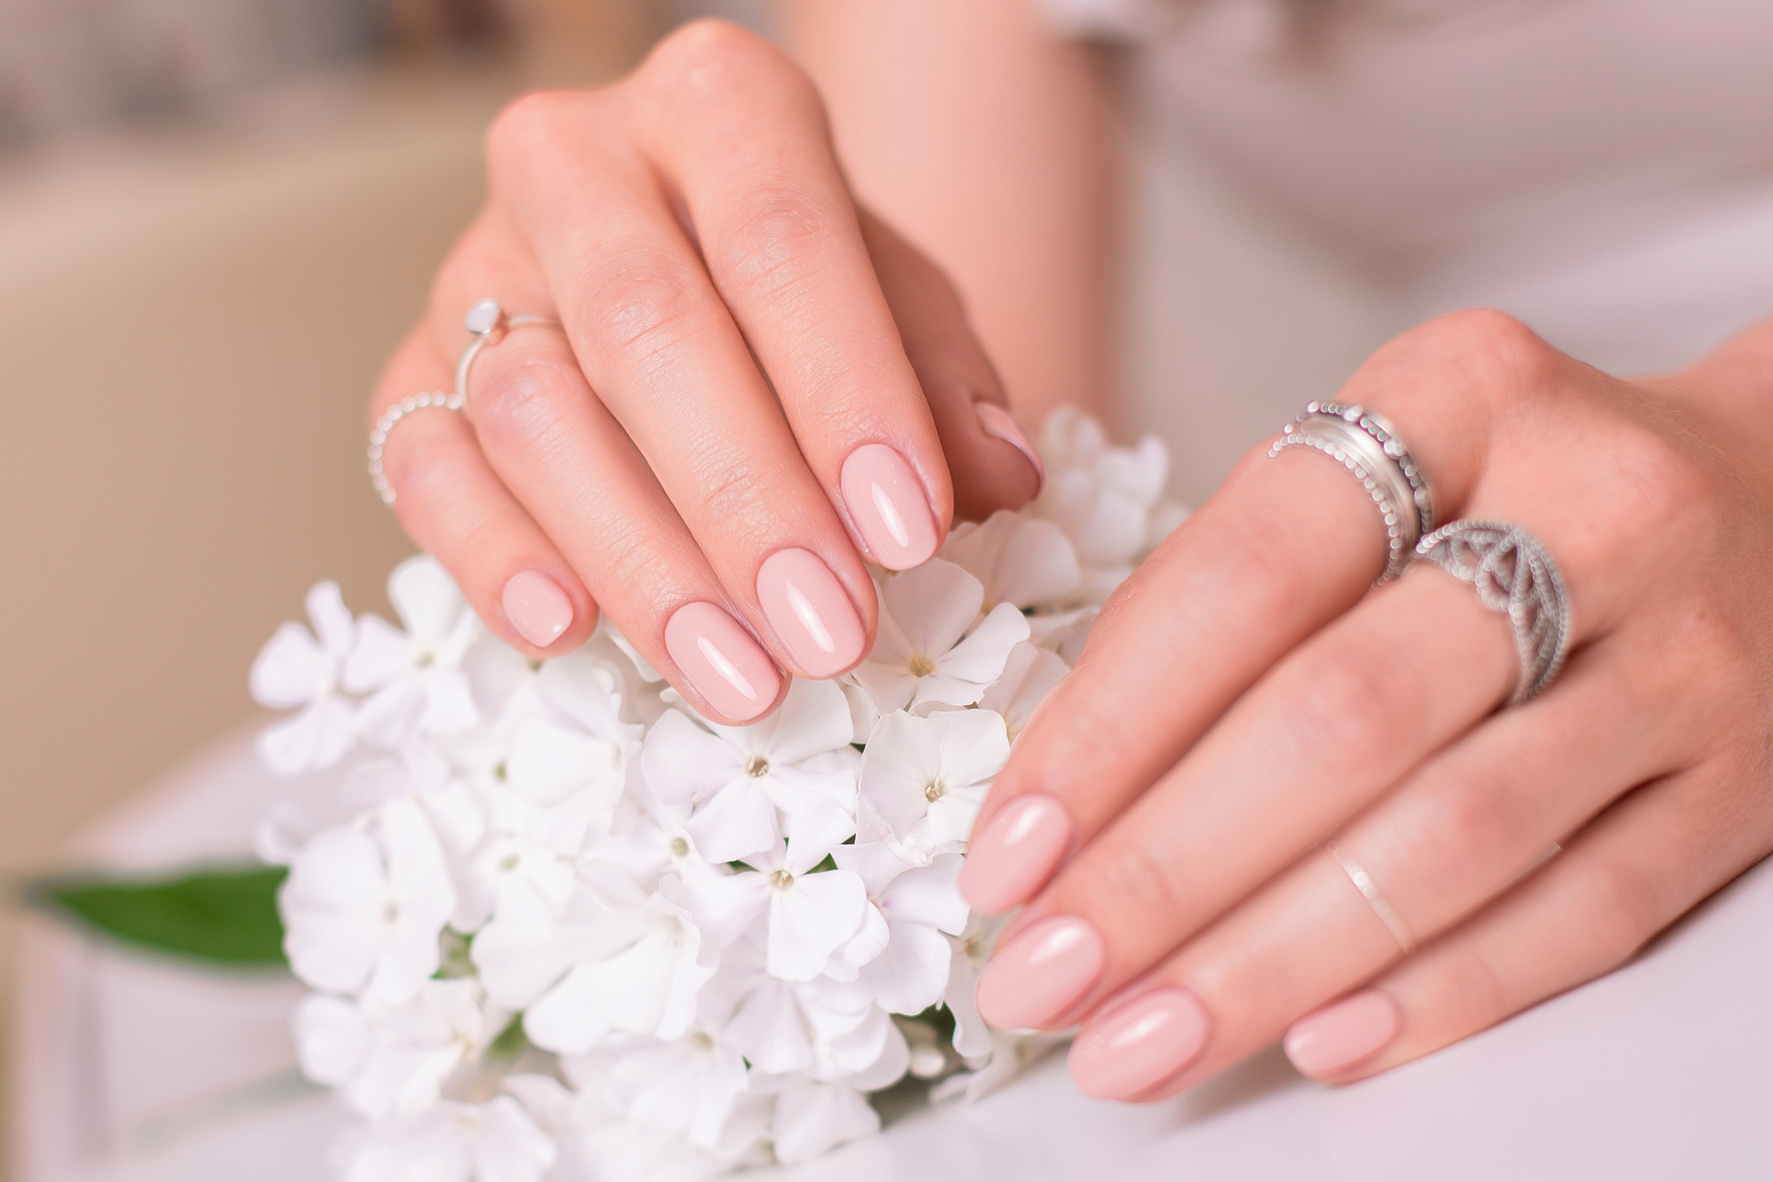 Female hands with romantic manicure nails, nude gel polish, white flowers